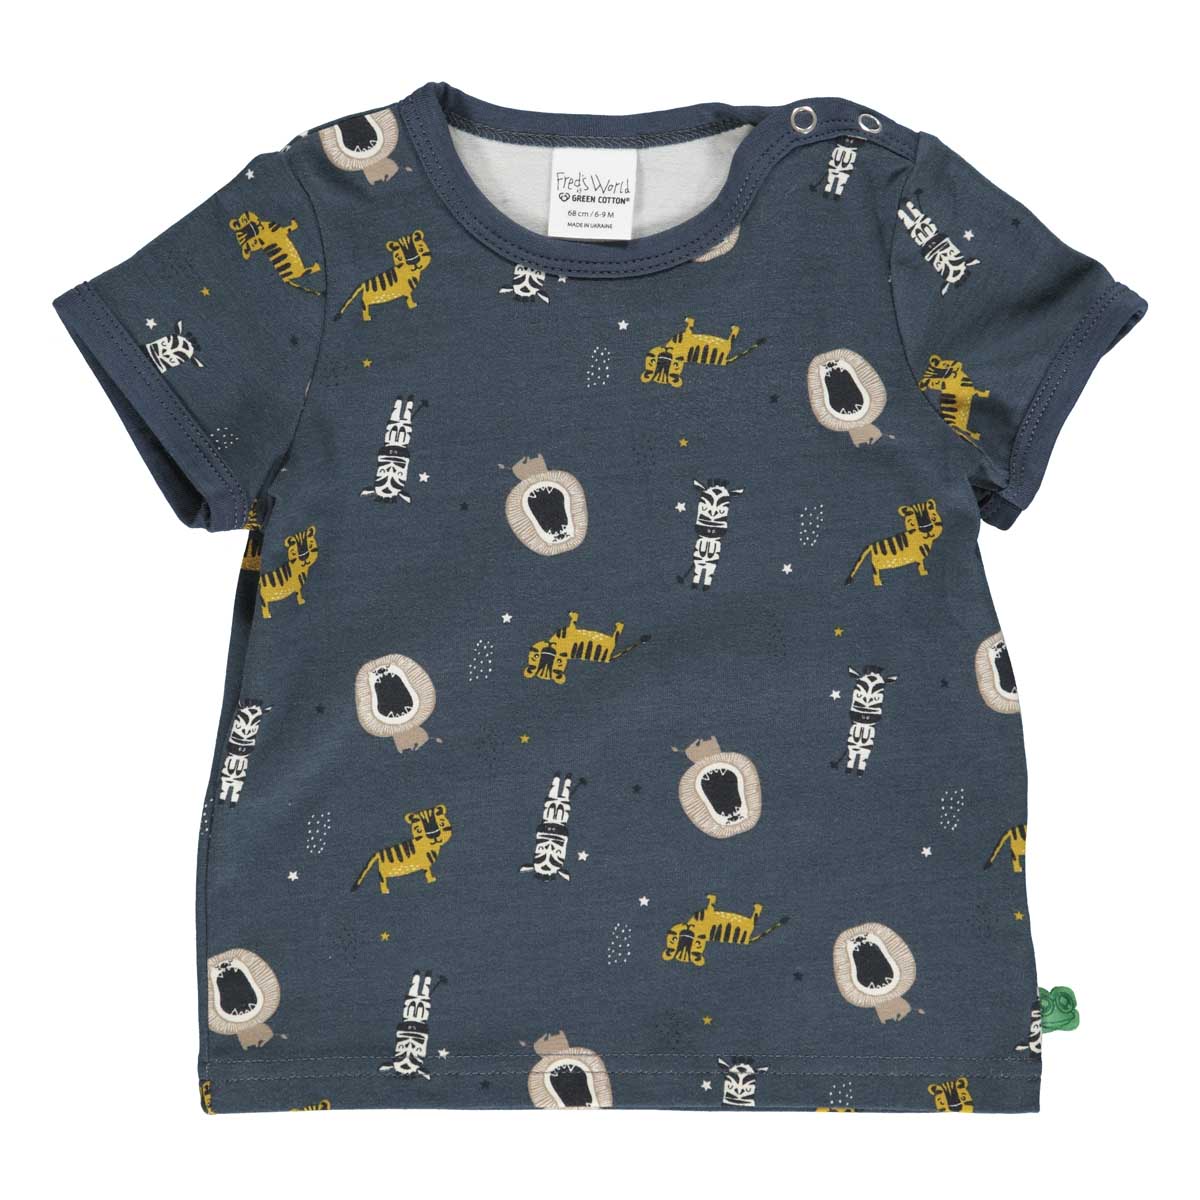 T-Shirt Zootiere Fred s World